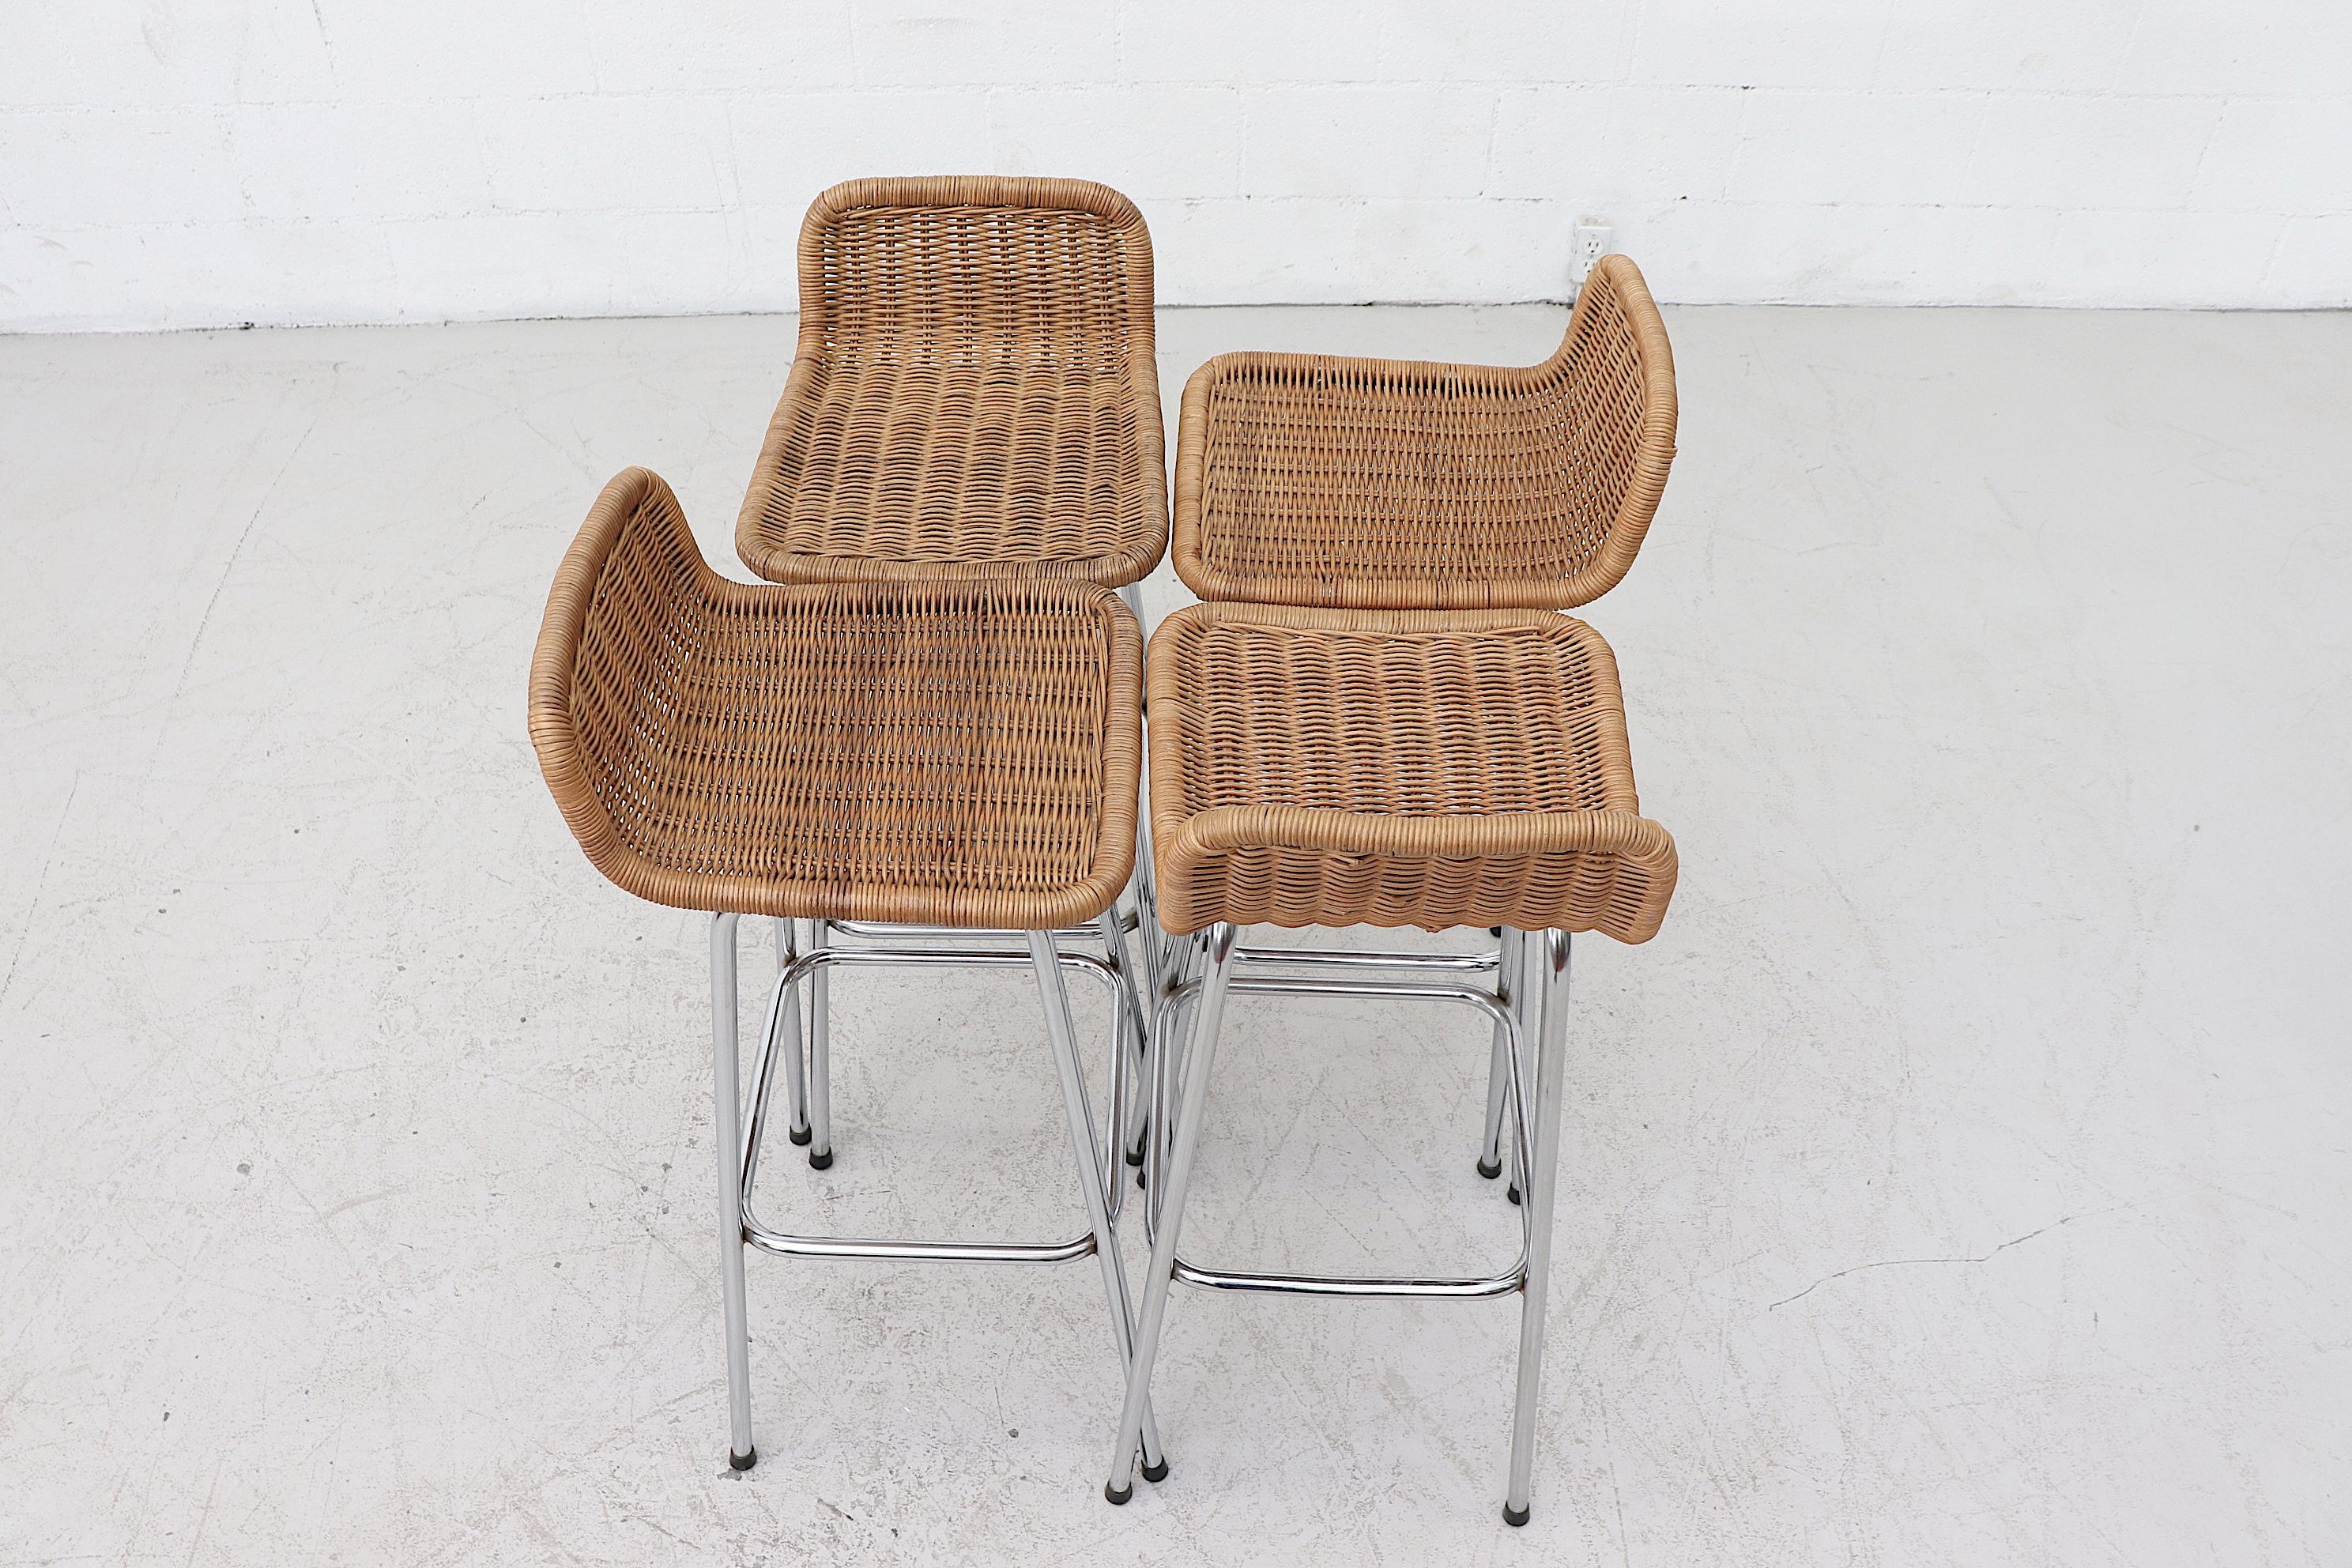 Set of 4 Charlotte Perriand style bar stools with low rounded rattan seat and chrome tubular frame in original condition with visible wear. Wear varies from stool to stool. Measures: Seat heights are 31